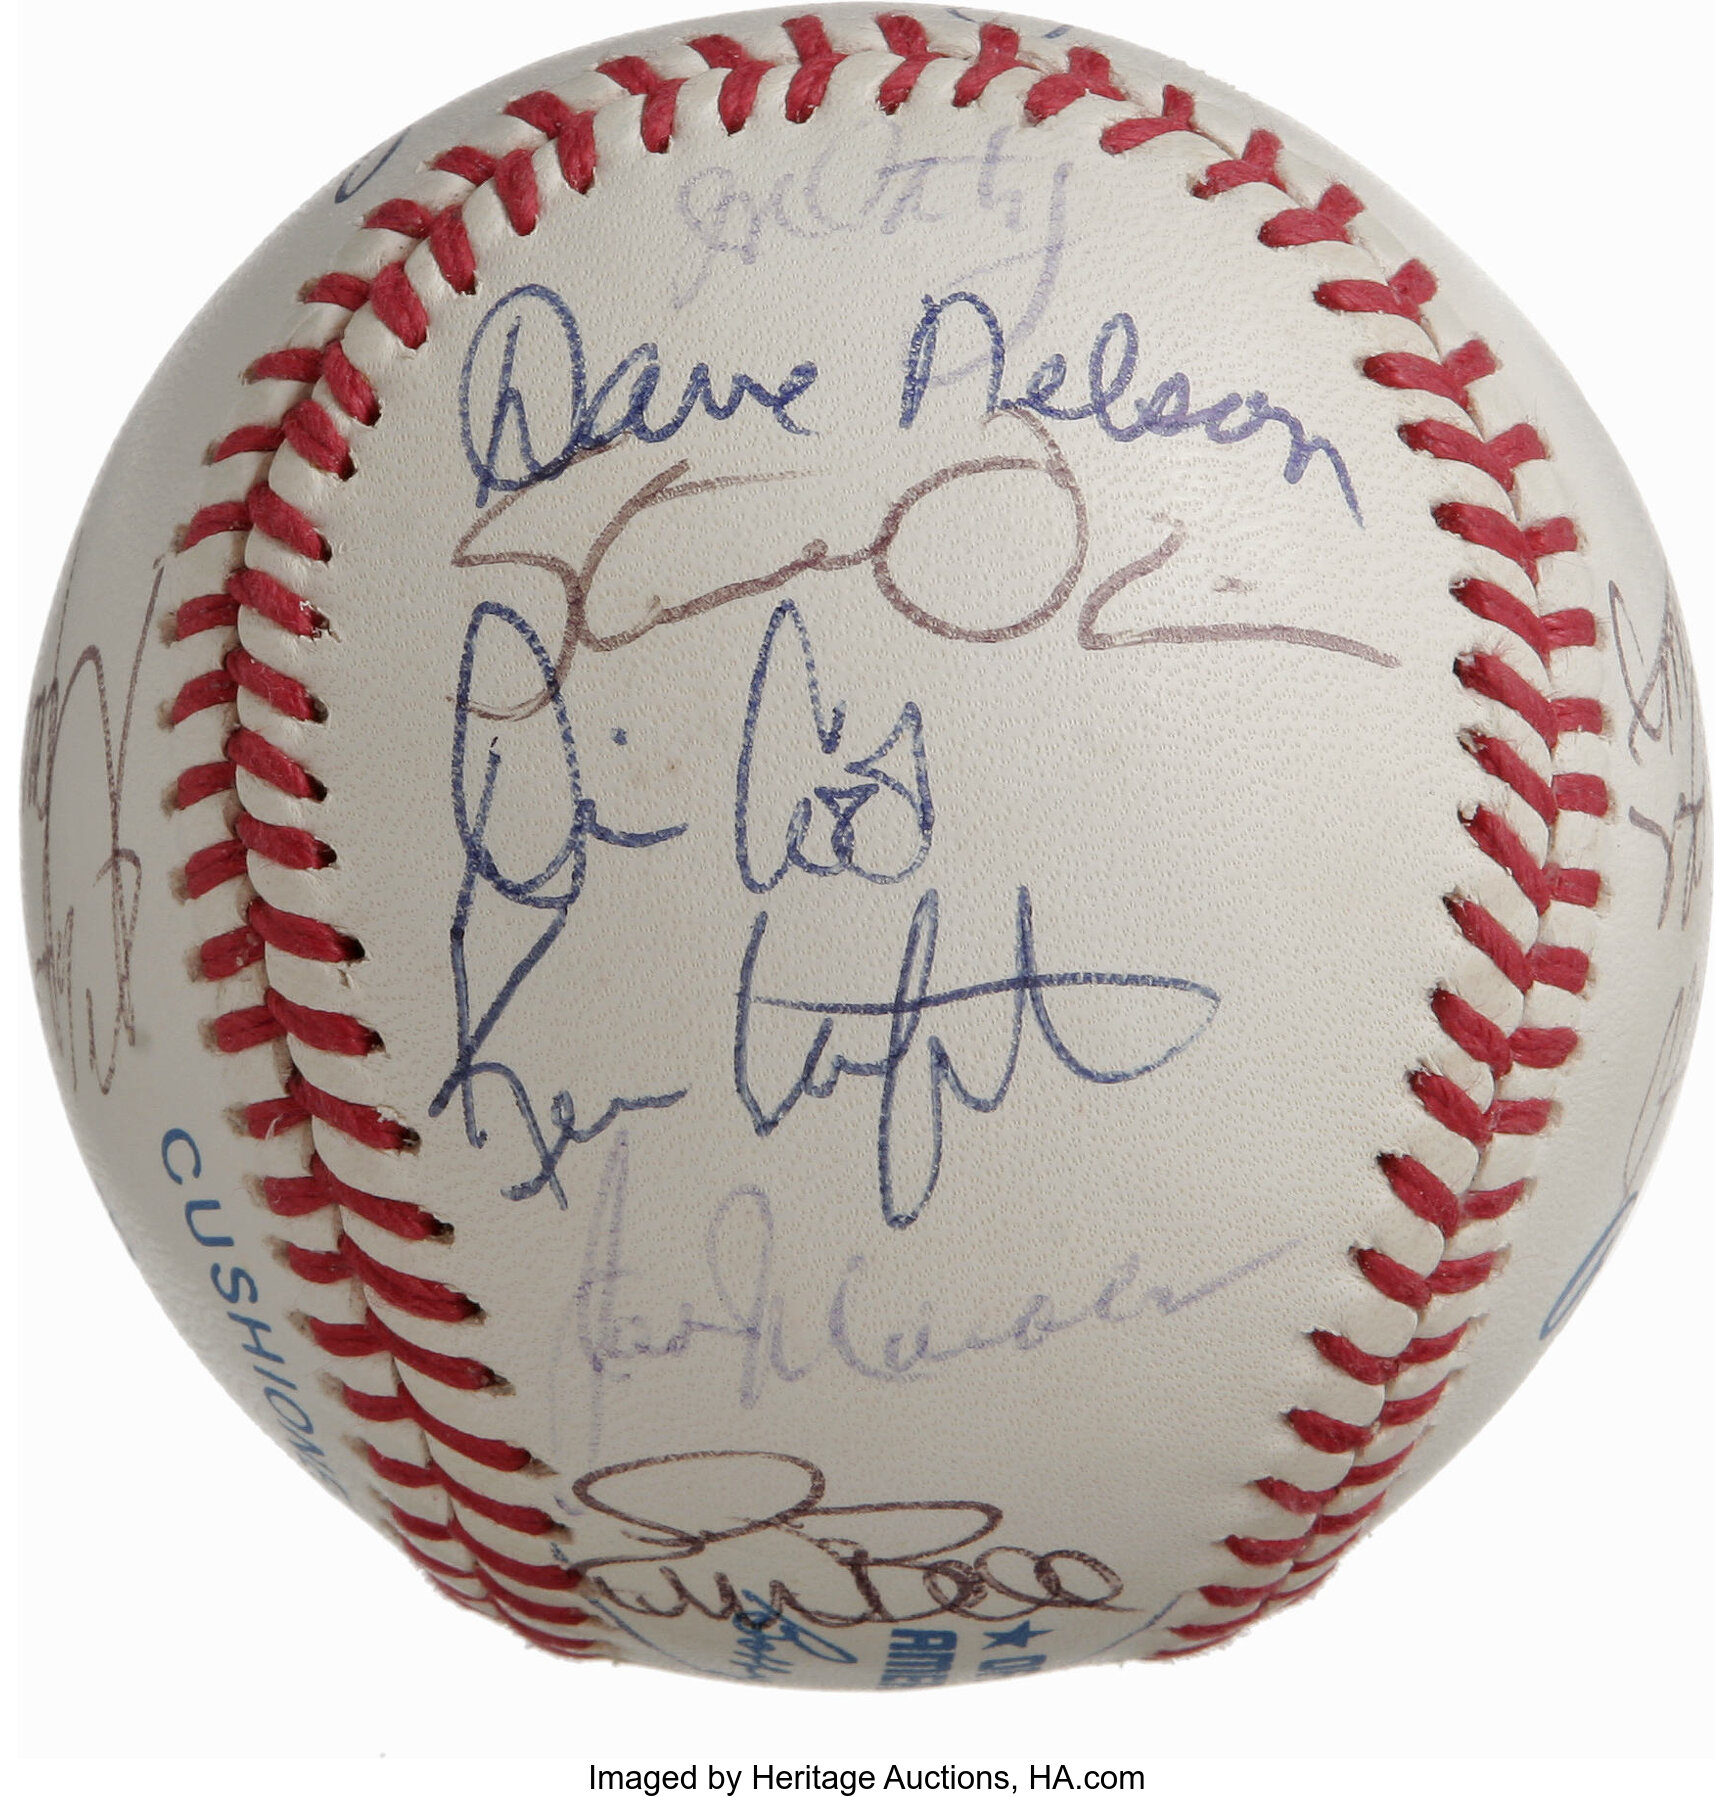 1992 Cleveland Indians Team Signed Baseball. Eighteen from the